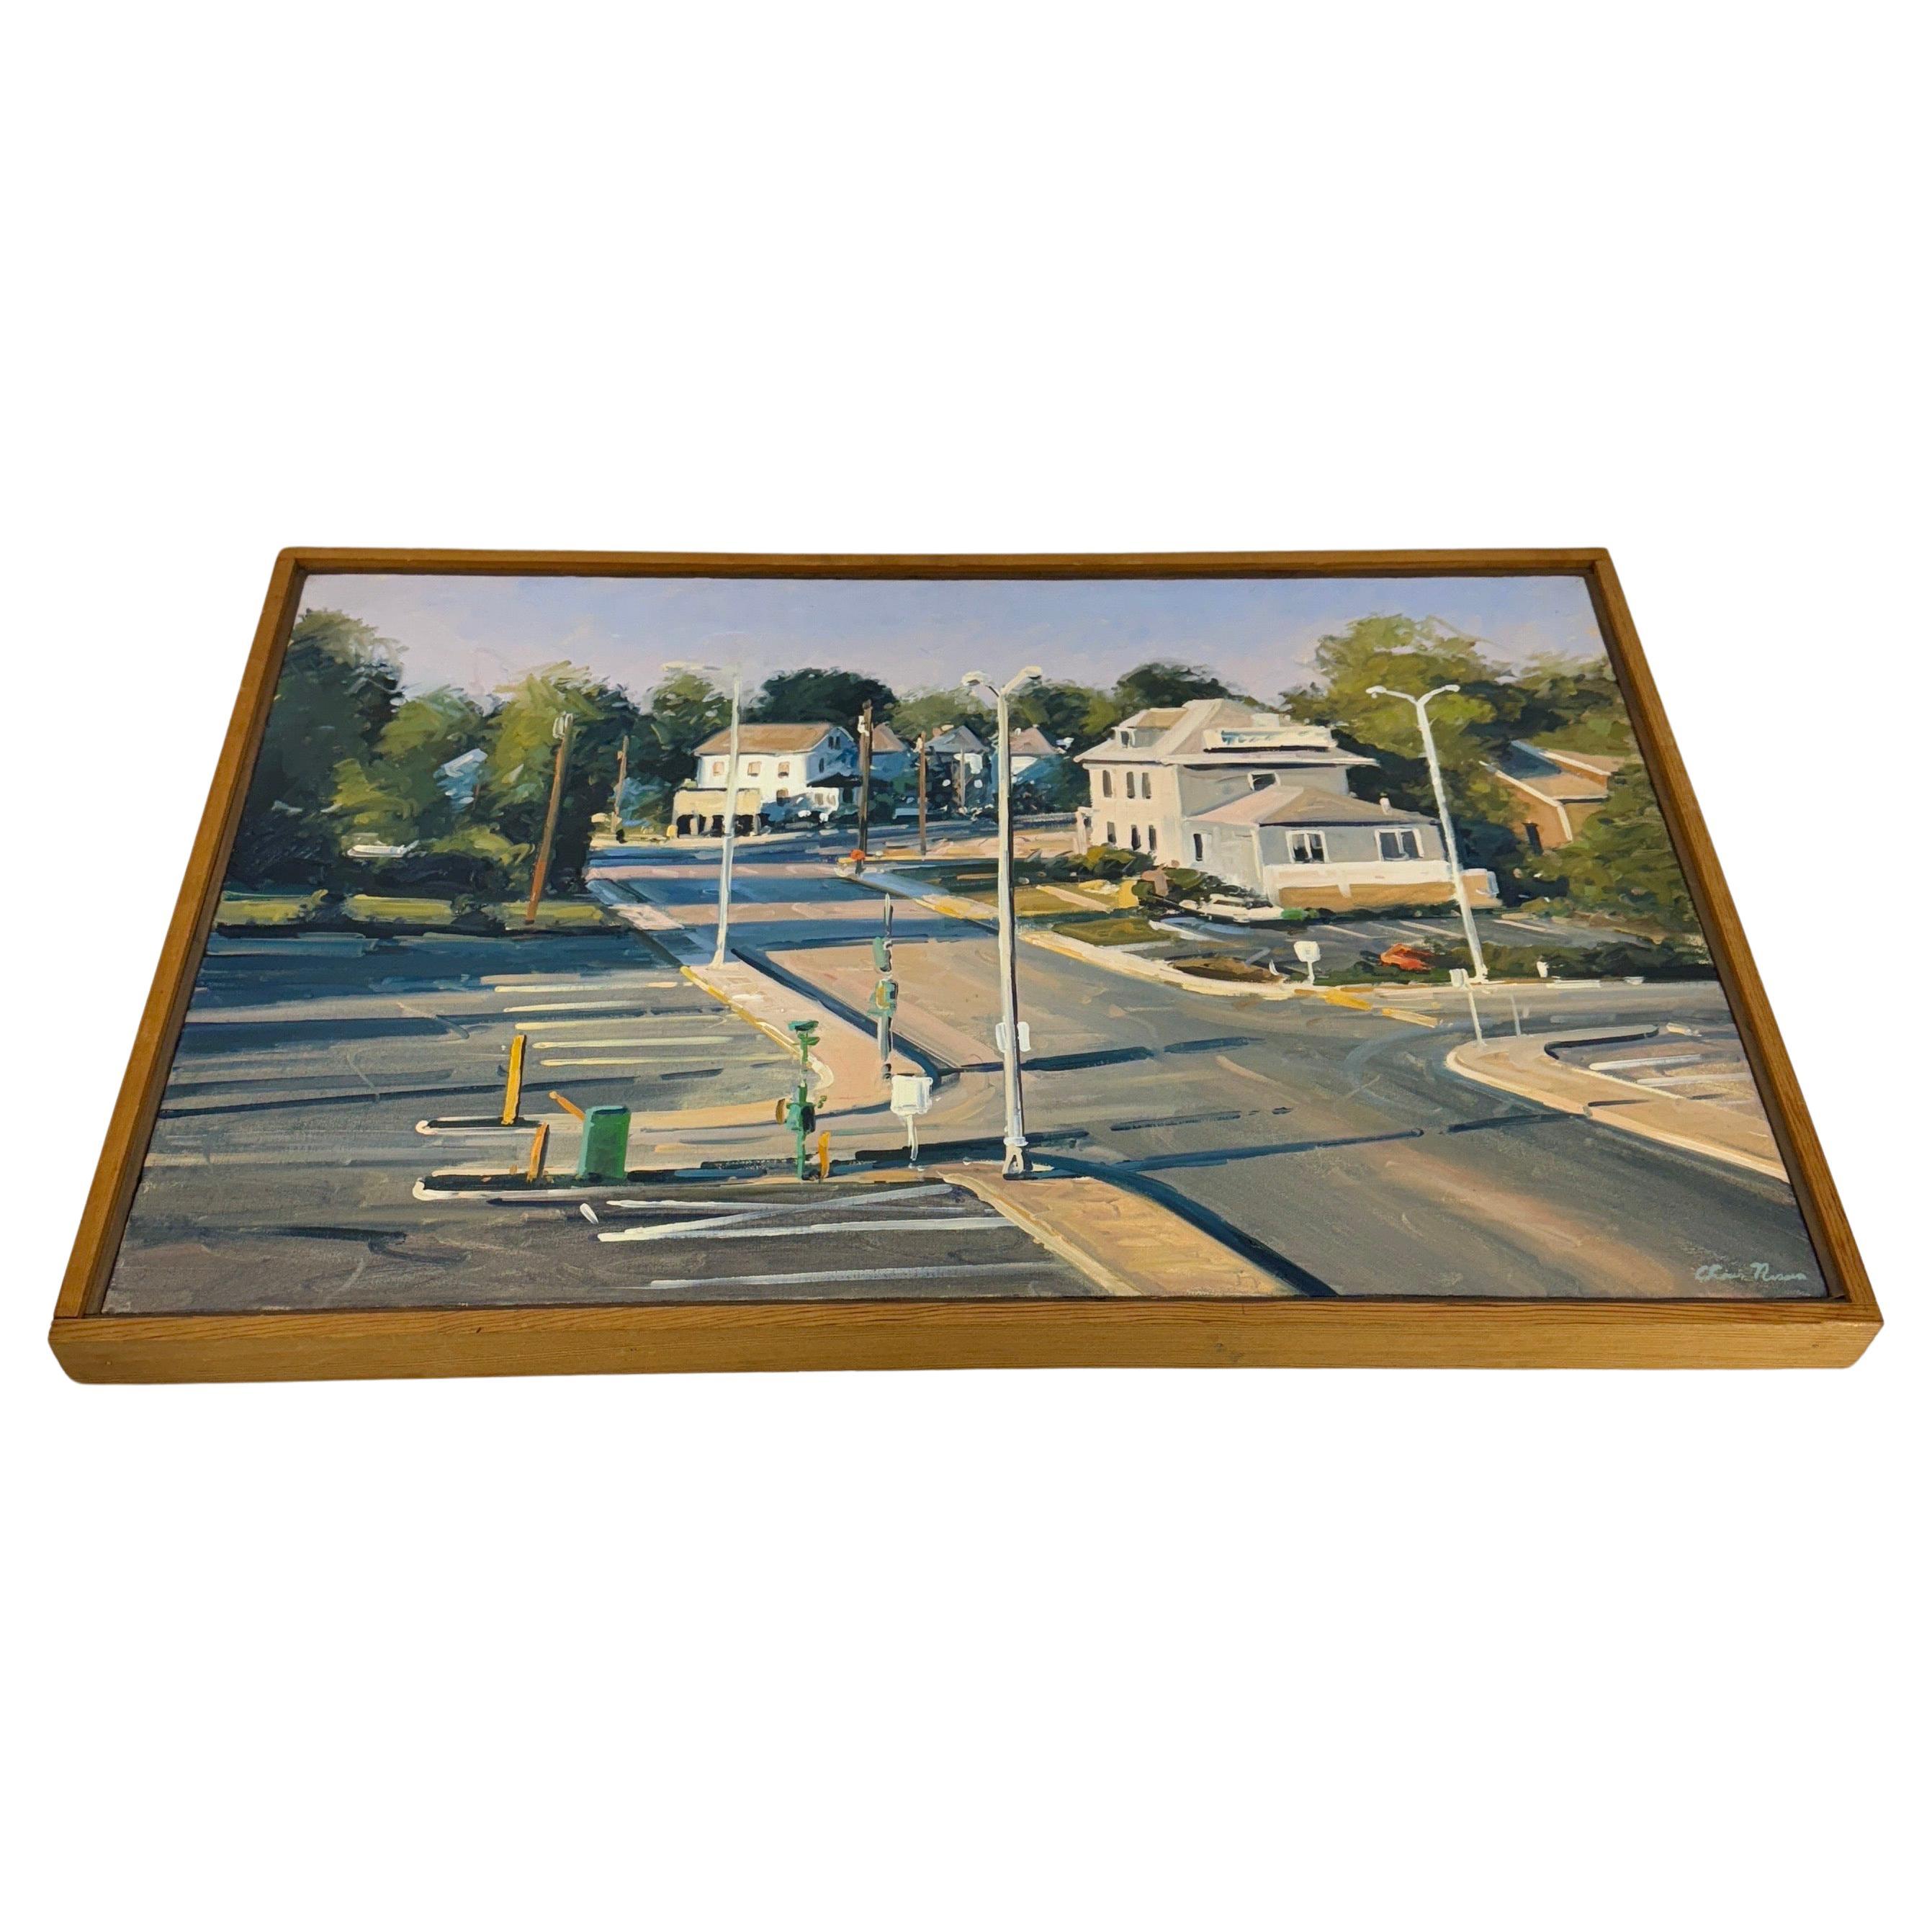 Realism Oil Painting Mid-Century Street Scene of Intersection

Large and very realistic oil painting from Chris Nissen. Chris Nissen is a nationally known award winning American artist from Philadelphia, PA, principally known for his landscape